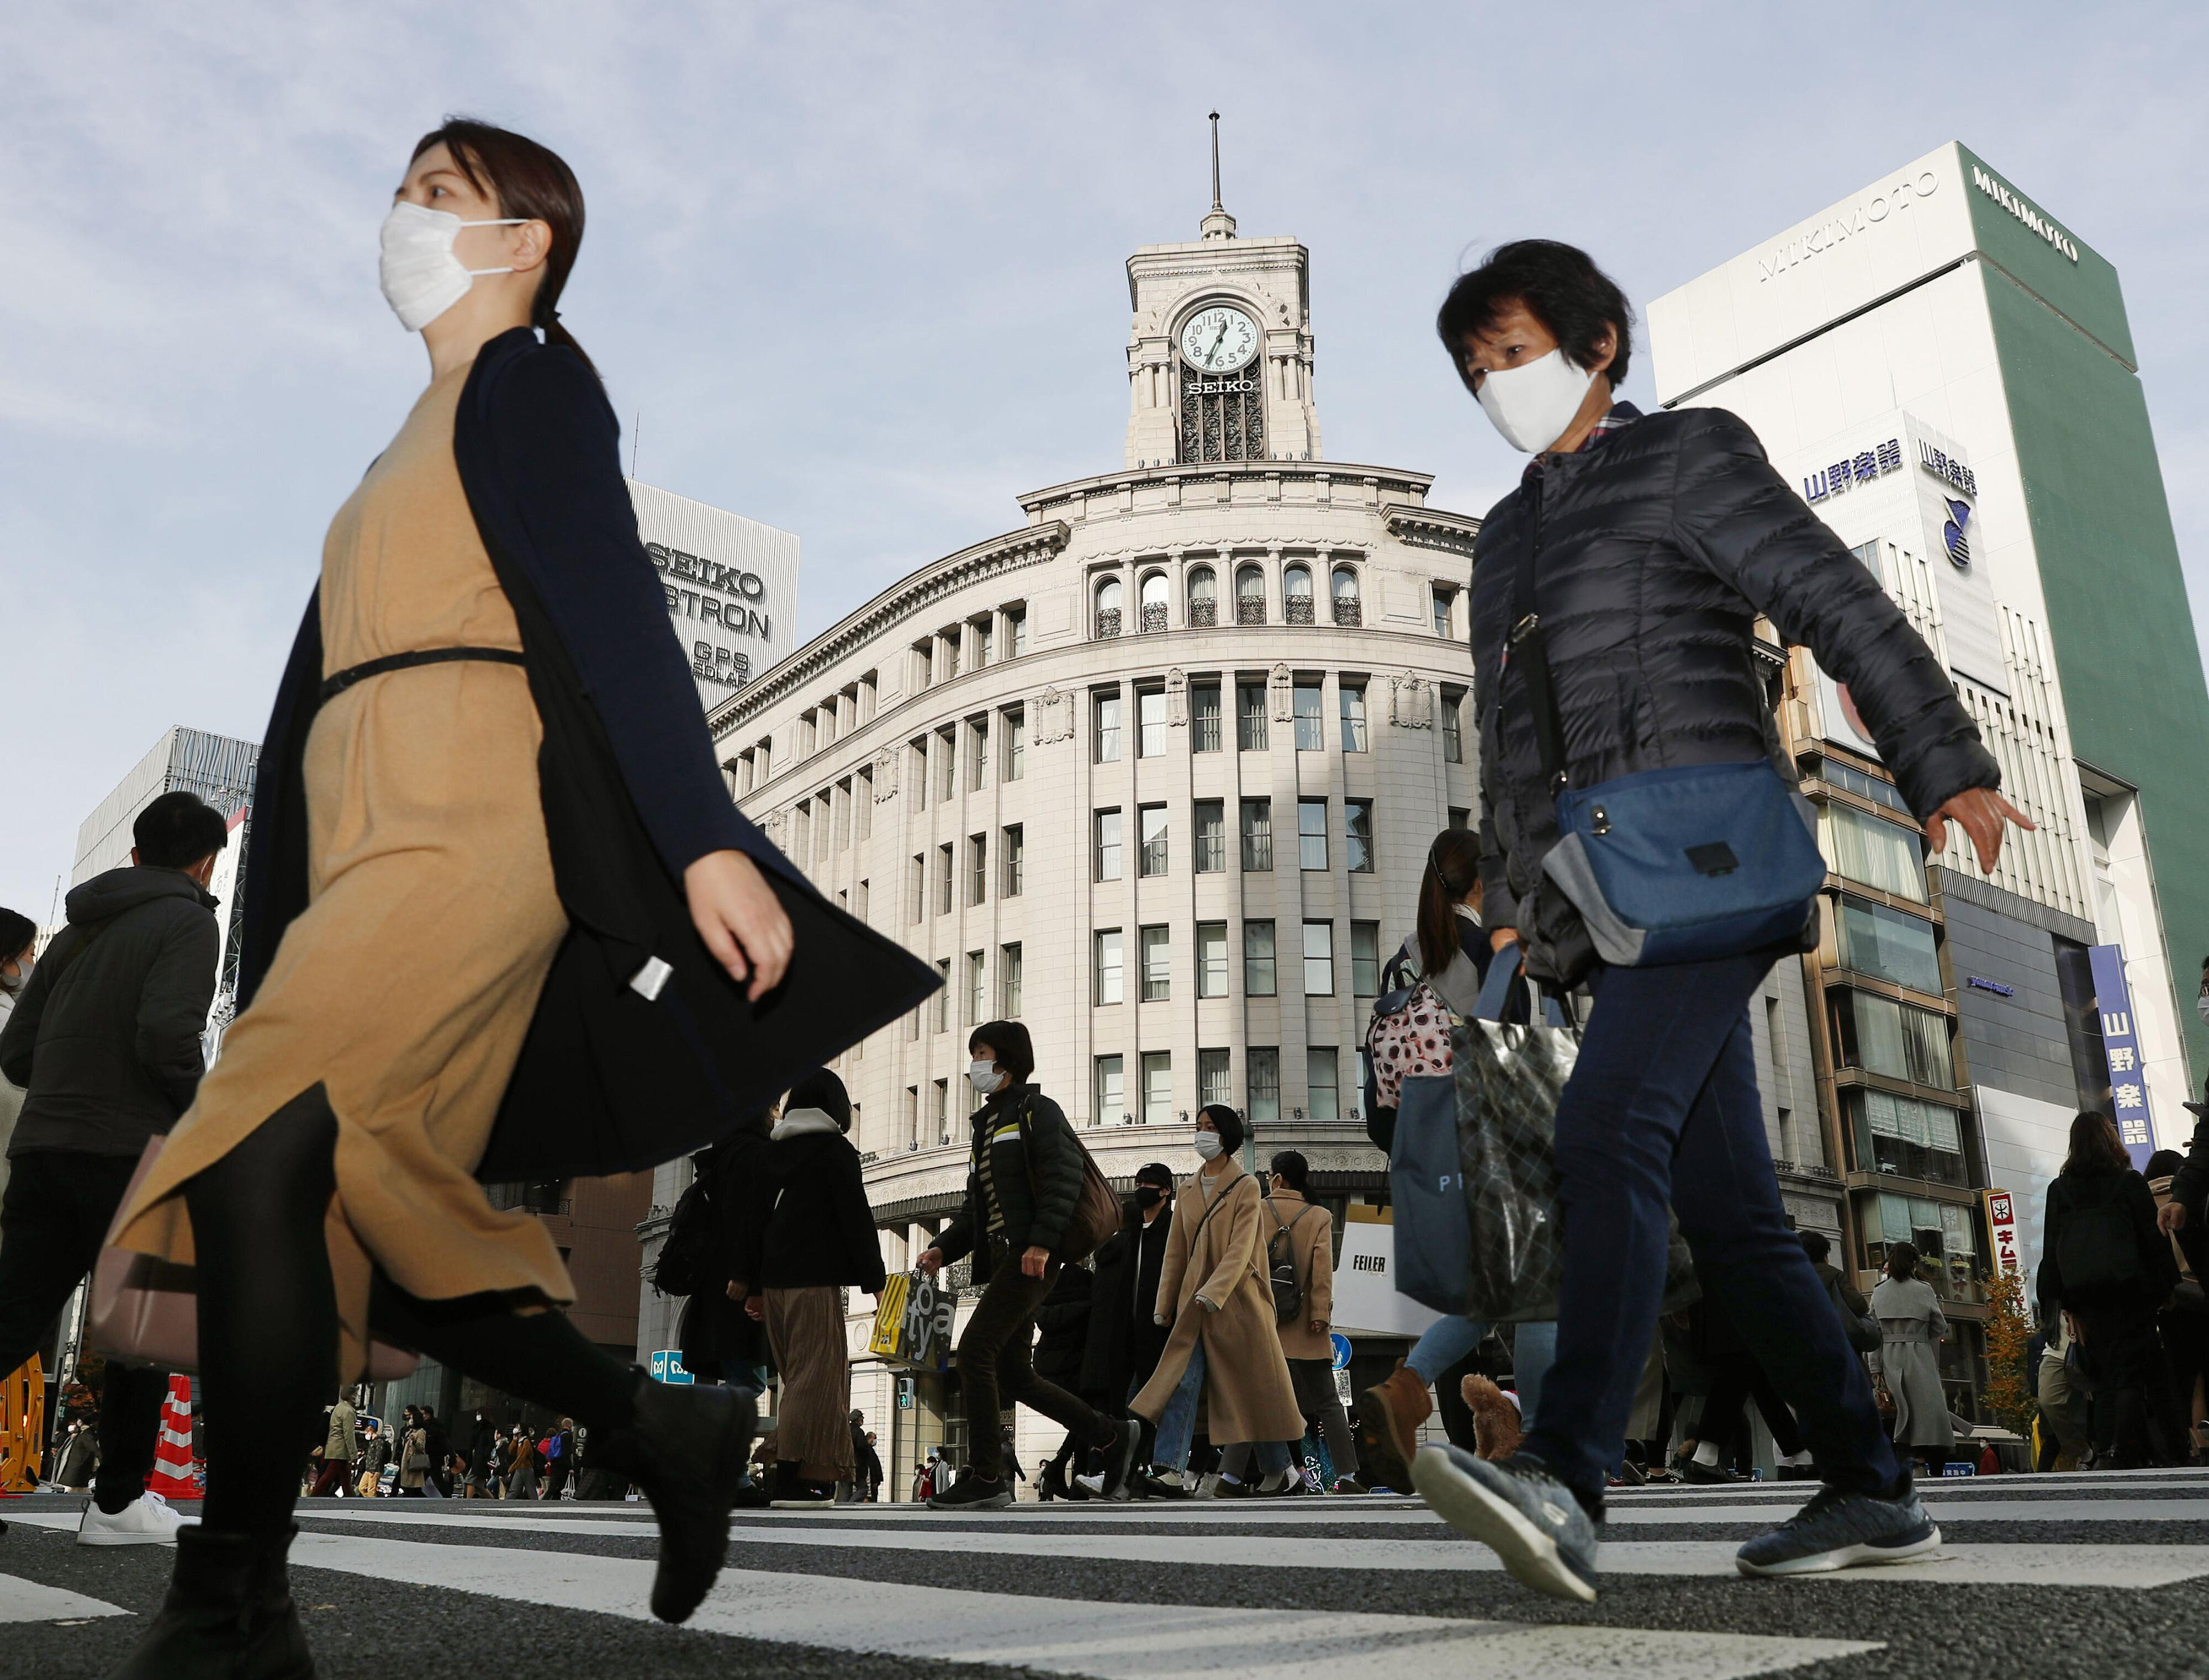 People cross an intersection in Tokyo's Ginza district on December 13, 2020. Japan’s daily coronavirus cases have exceeded 3,000 for the first time while the government delays stricter measures for fear of hurting the economy ahead of the holiday season.